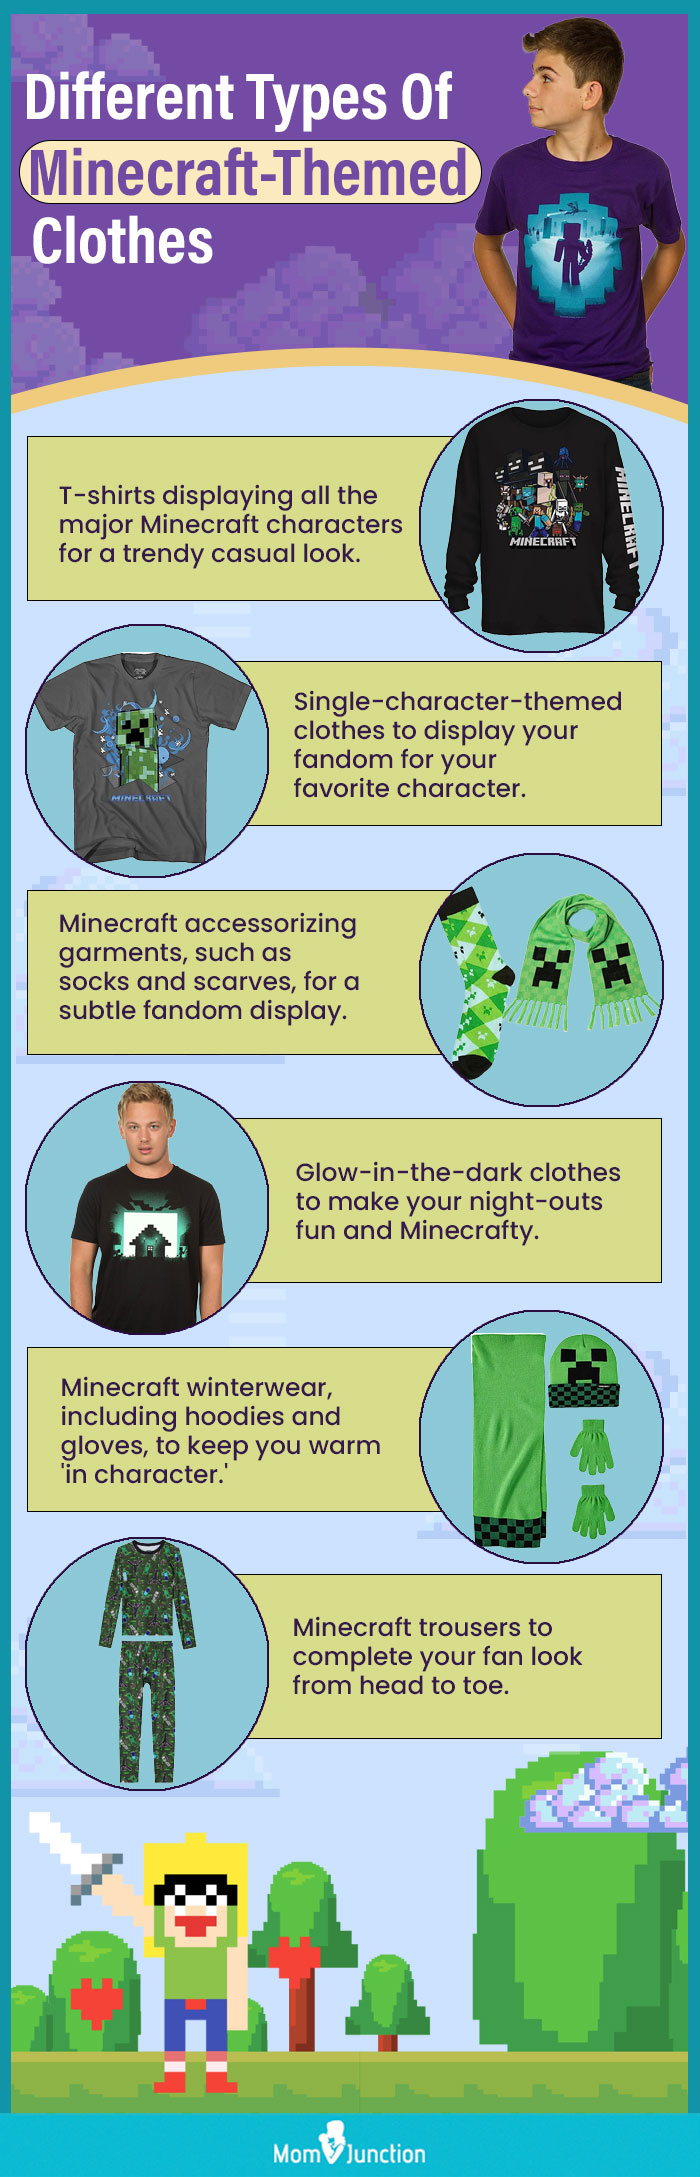 Different Types Of Minecraft Themed Clothes (infographic)